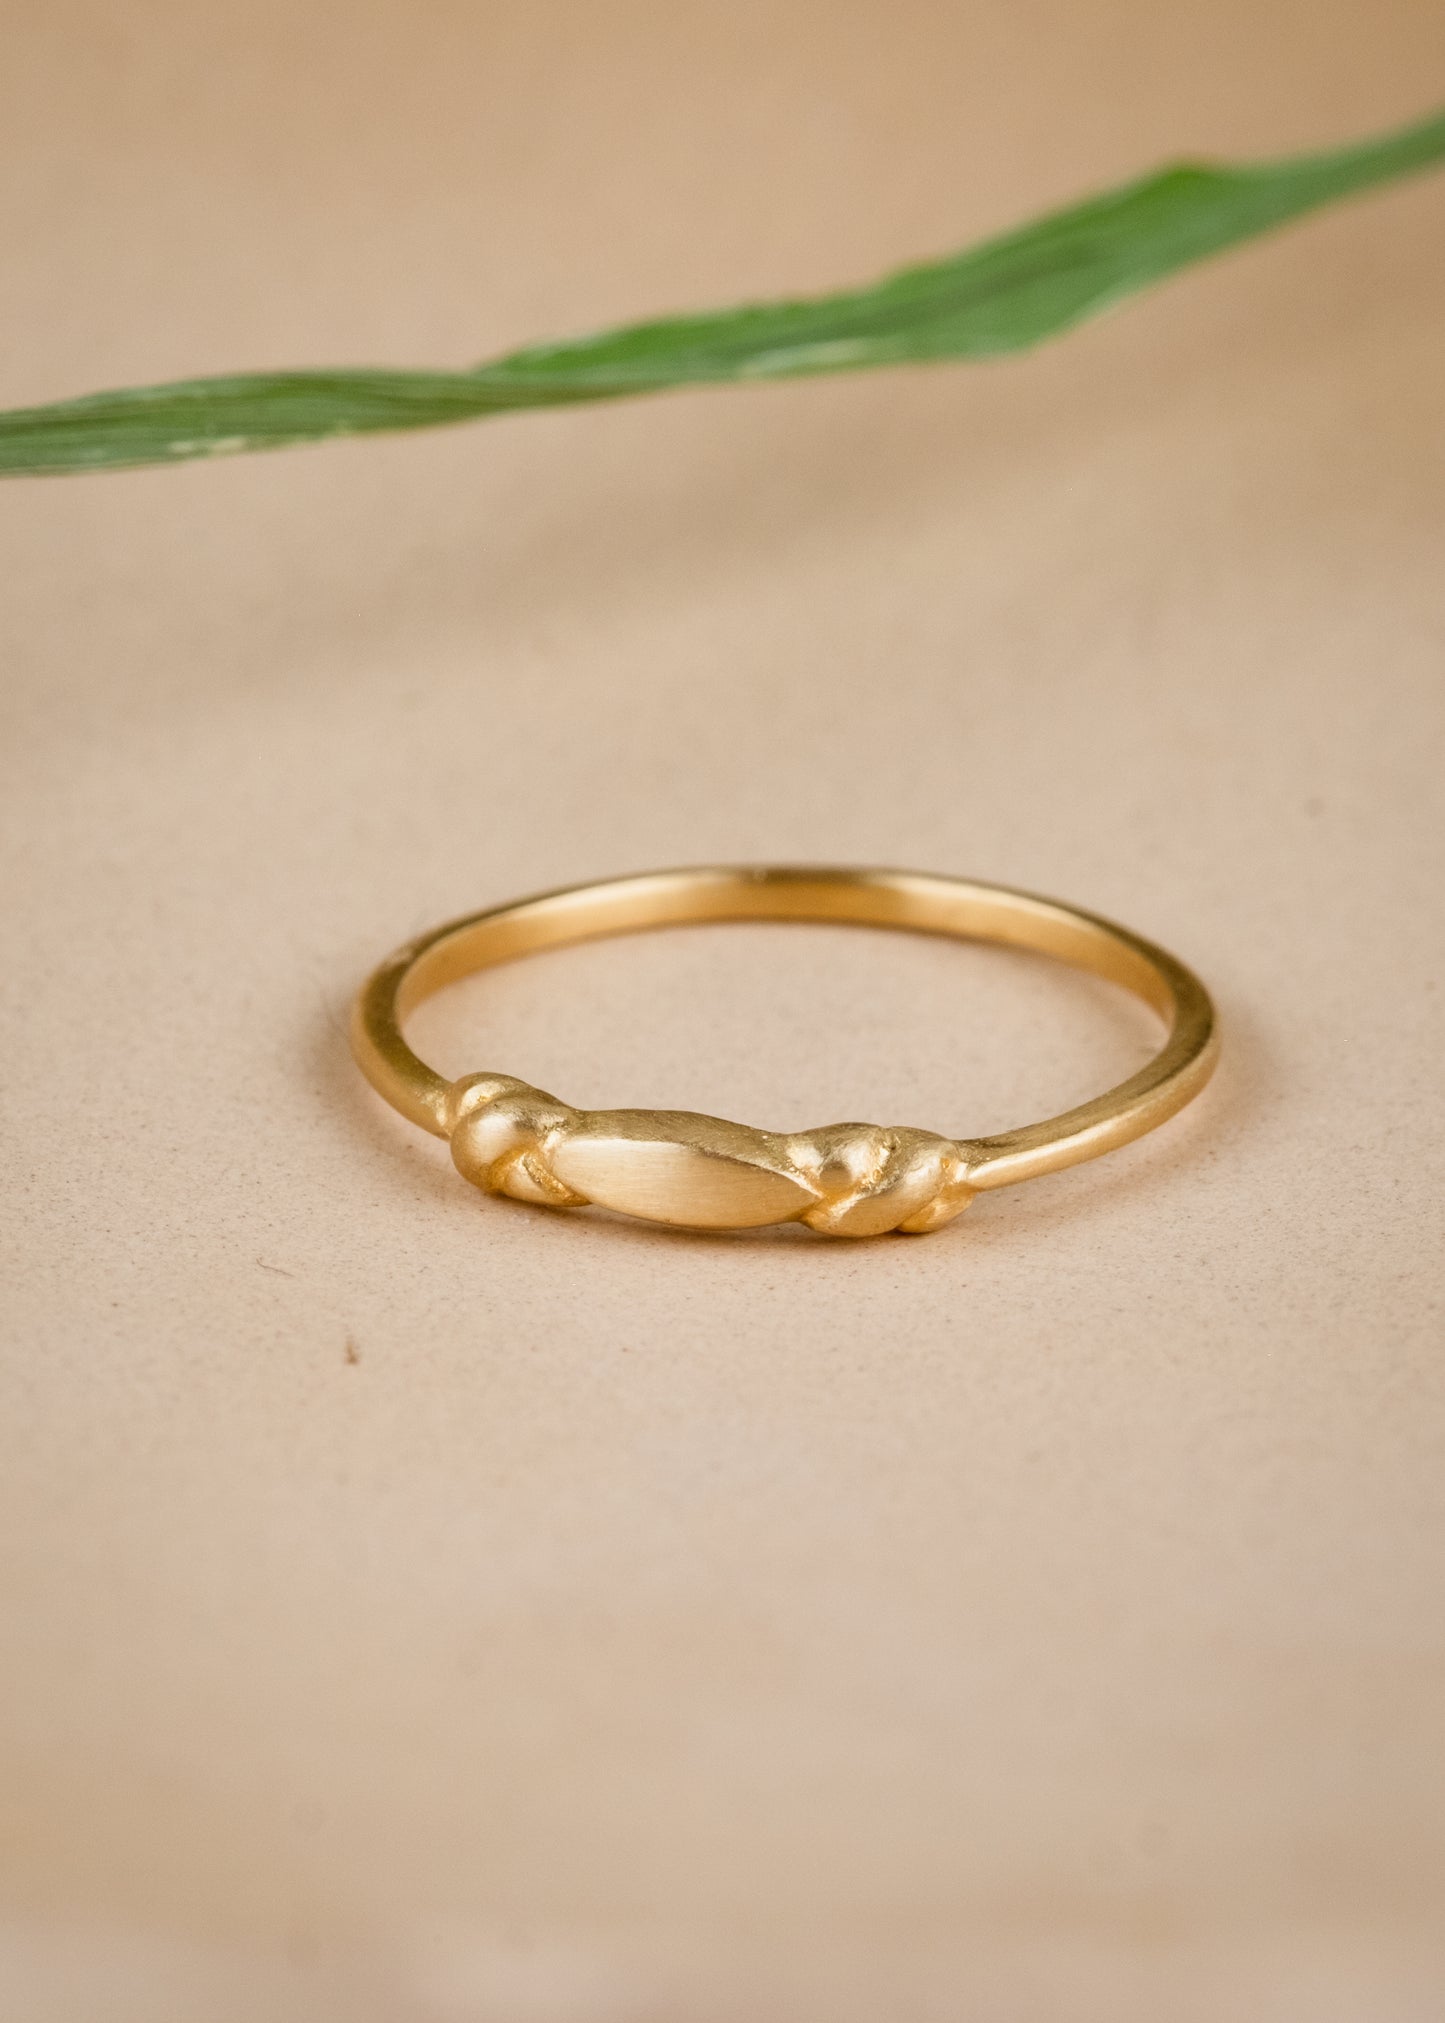 Like a cornice of a treasured landmarked building, the Bond ring features two intricate knots bonded astride a pointed oval–a dainty band ideal for everyday, for wearing solo or layering.